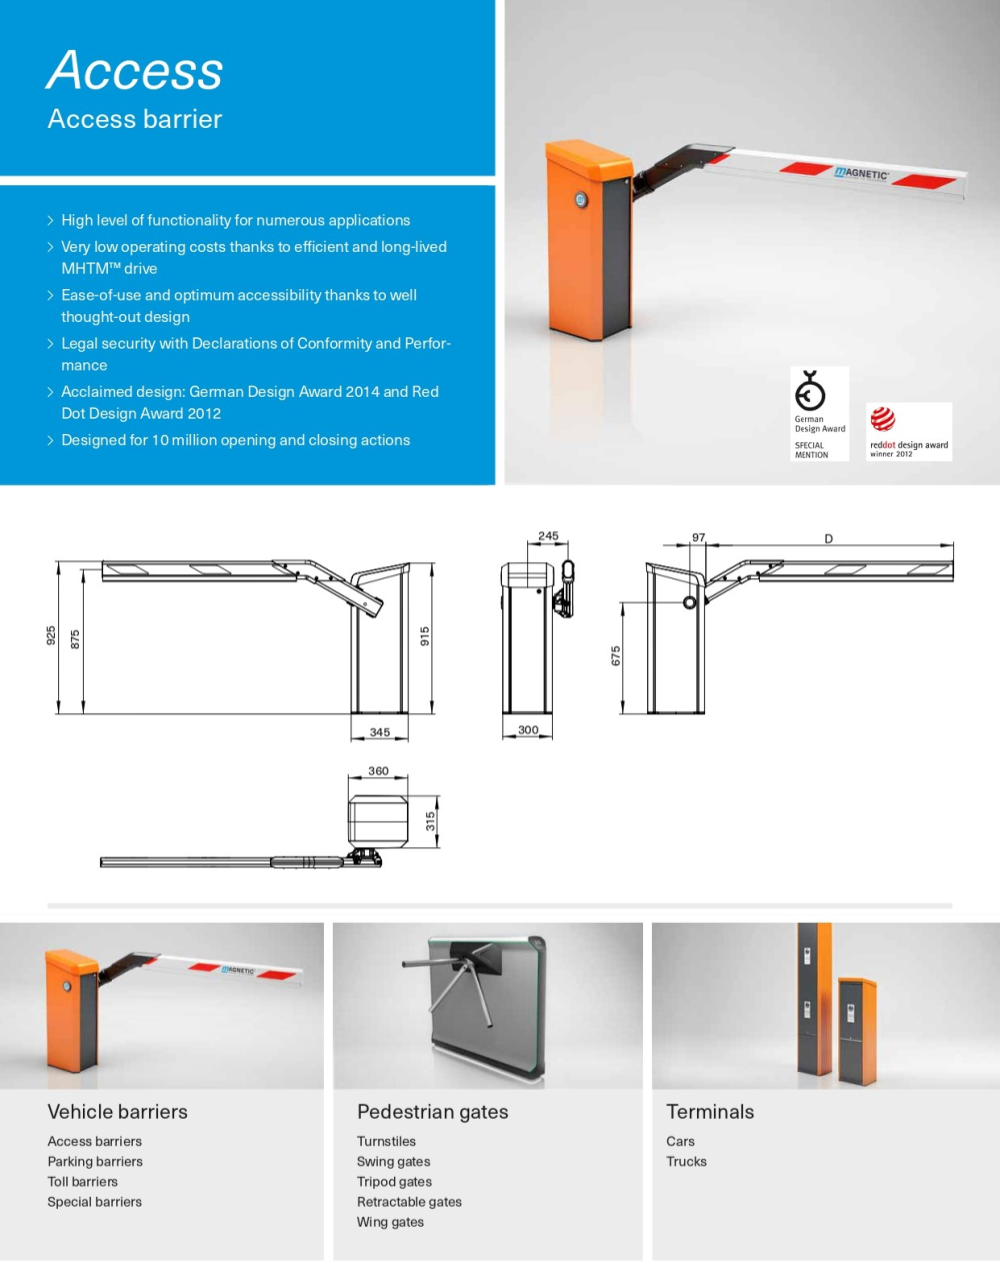 Gate barrier systems